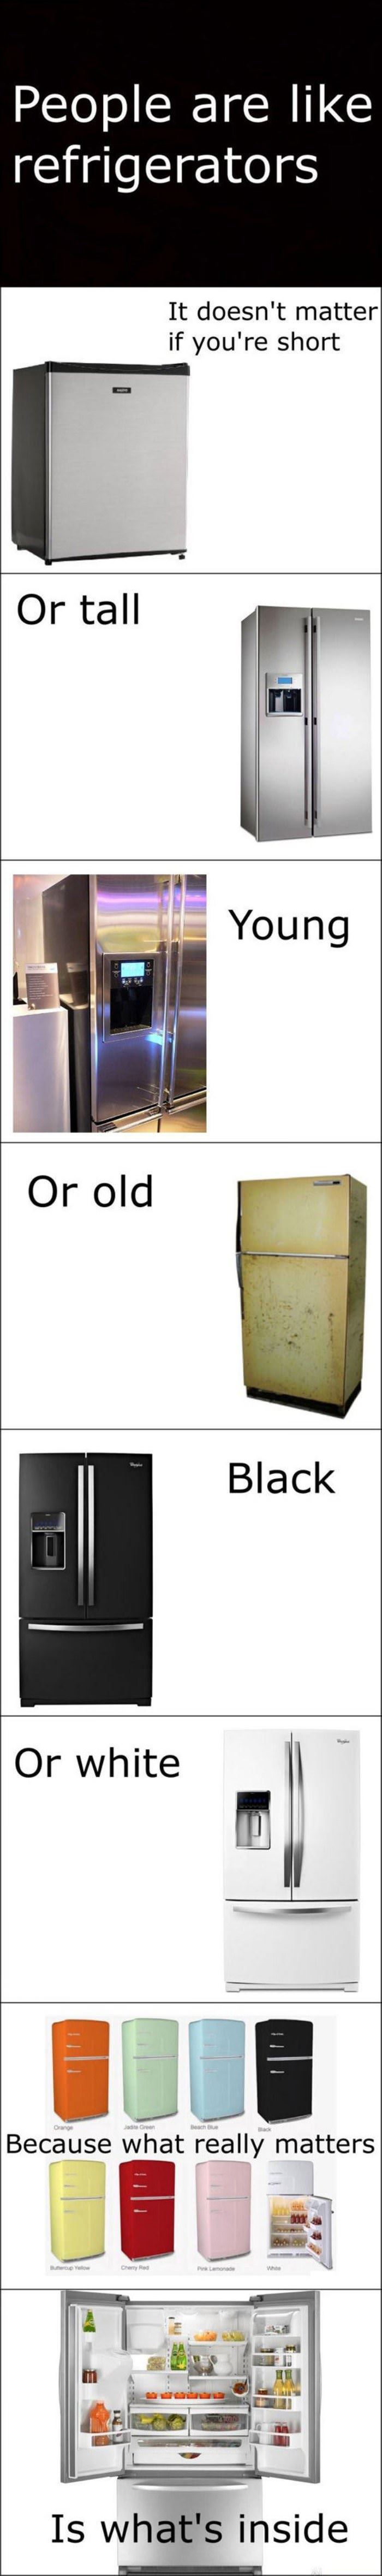 people are like refrigerators funny picture